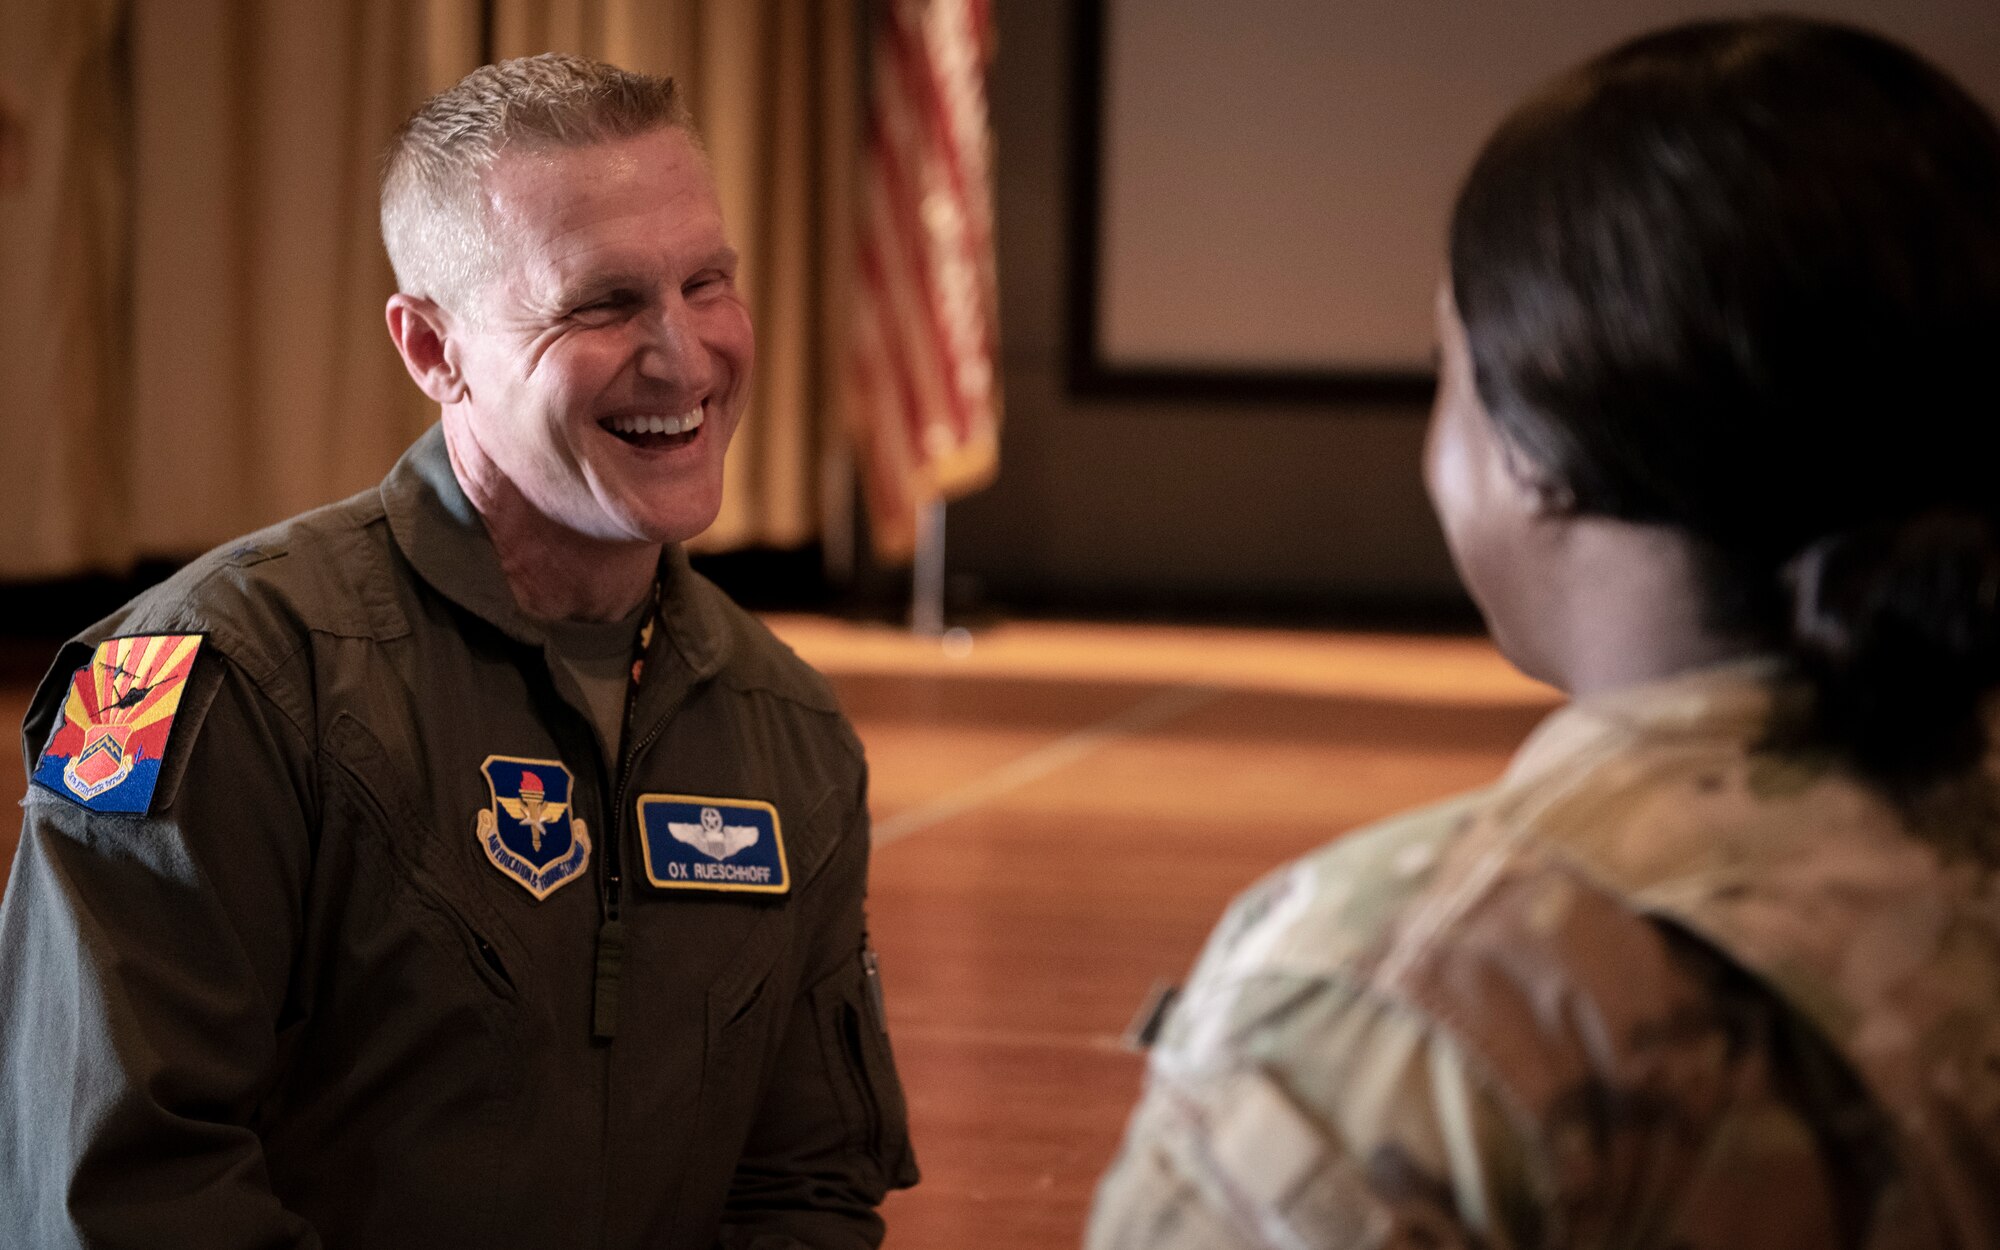 U.S. Air Force Brig. Gen. Jason M. Rueschhoff, 56th Fighter Wing commander, speaks with an Airman of the 56th FW, August 5, 2022, at Luke Air Force Base, Arizona.